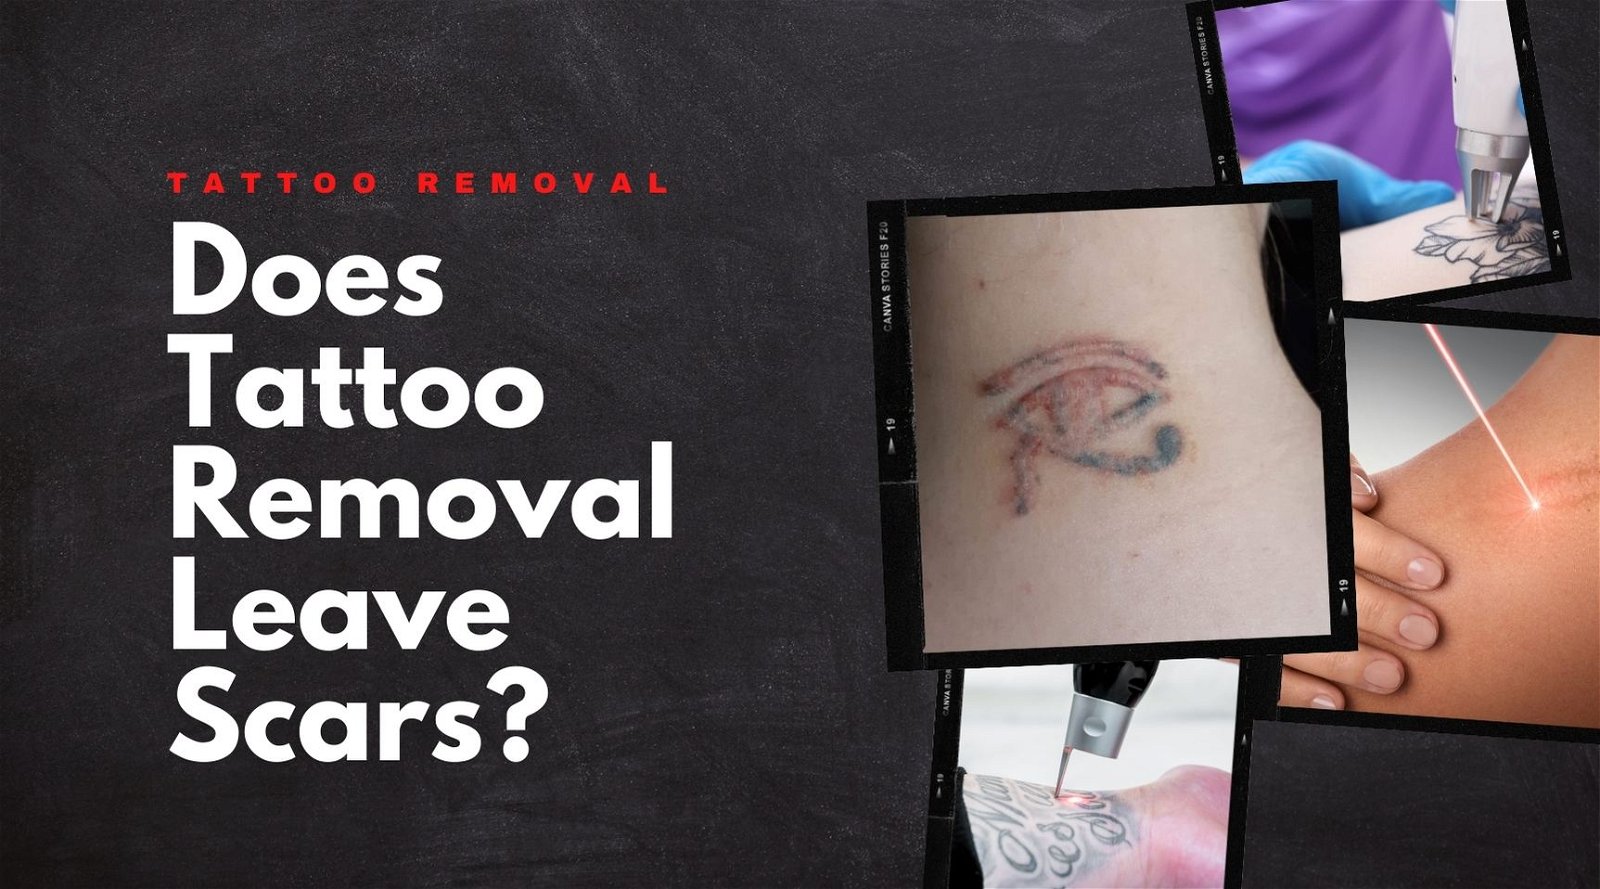 Tattoo Scarring Does Laser Tatto Removal Scar  Removery